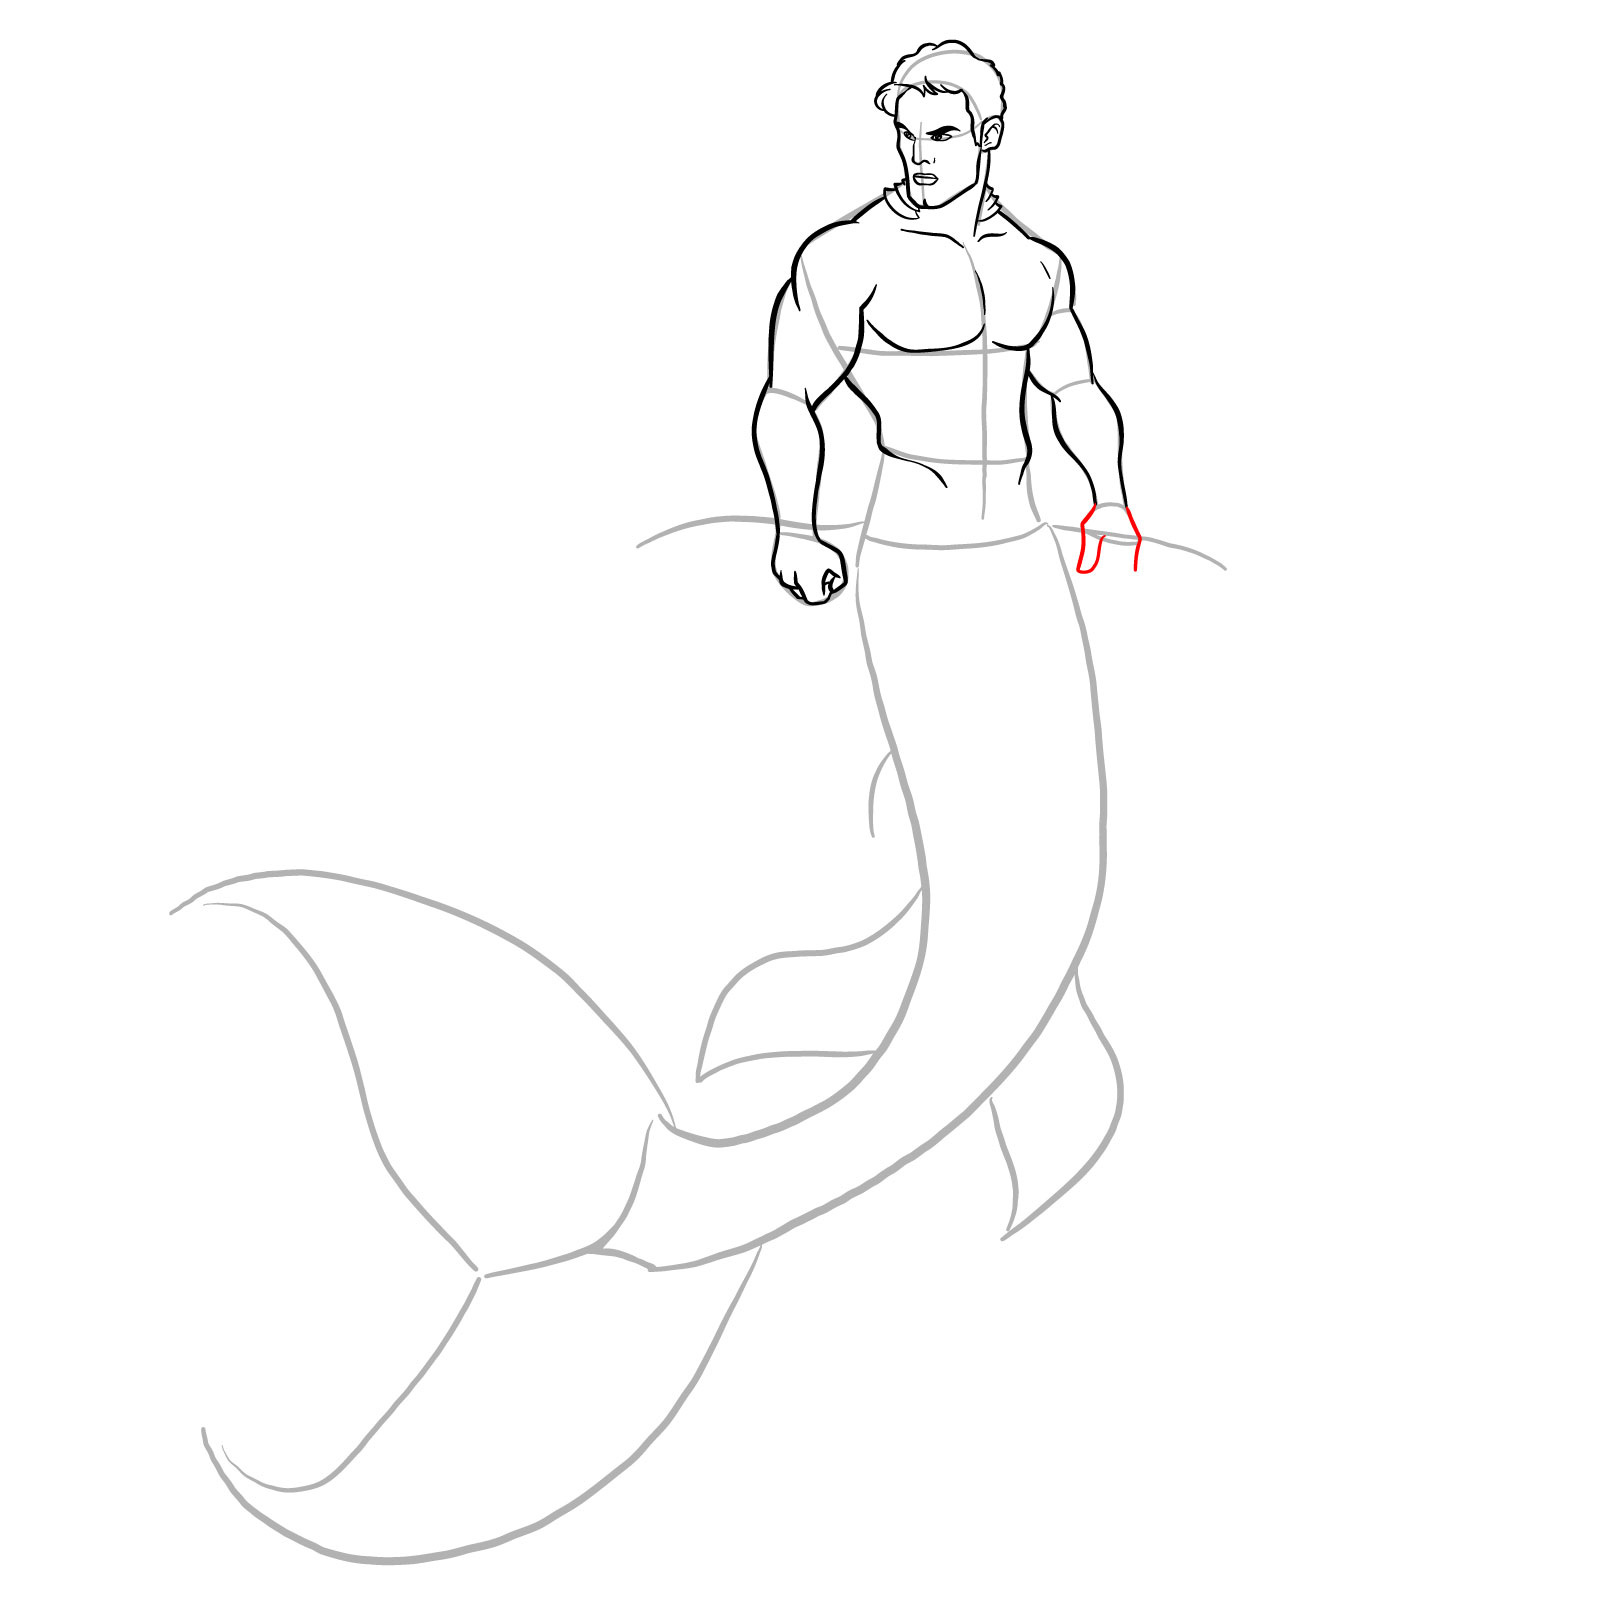 How to draw a Merman - step 20